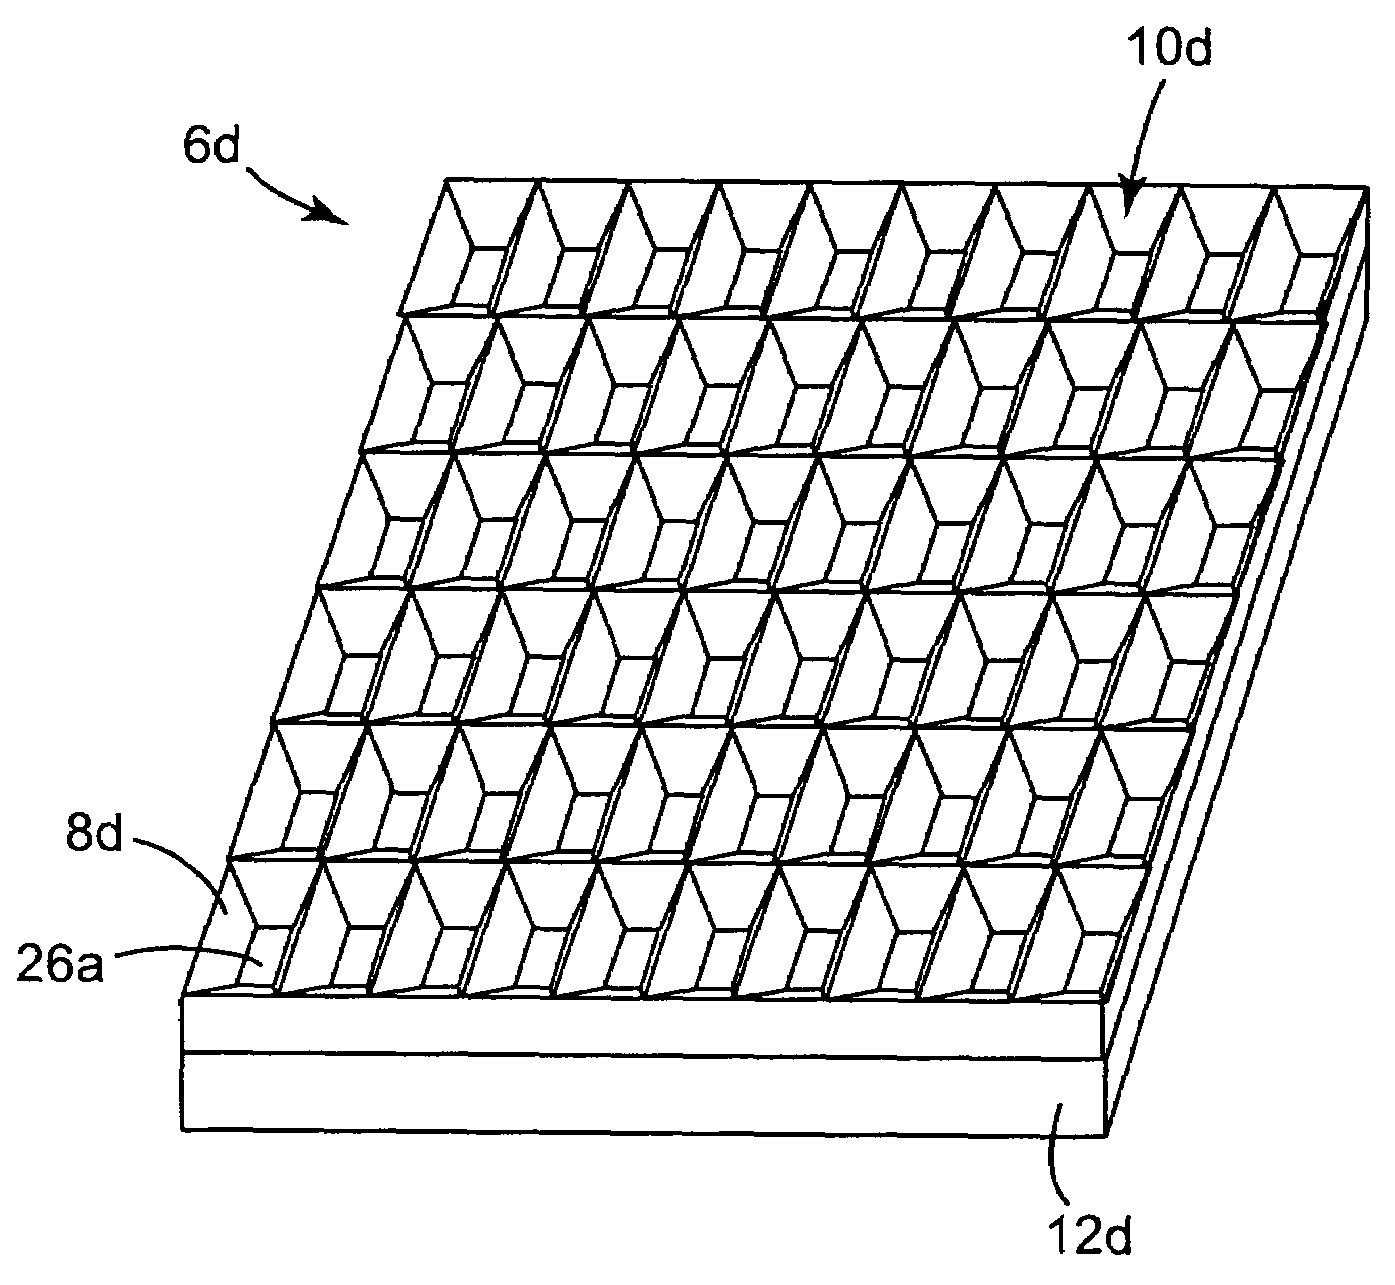 Optical film having a structured surface with concave pyramid-shaped structures